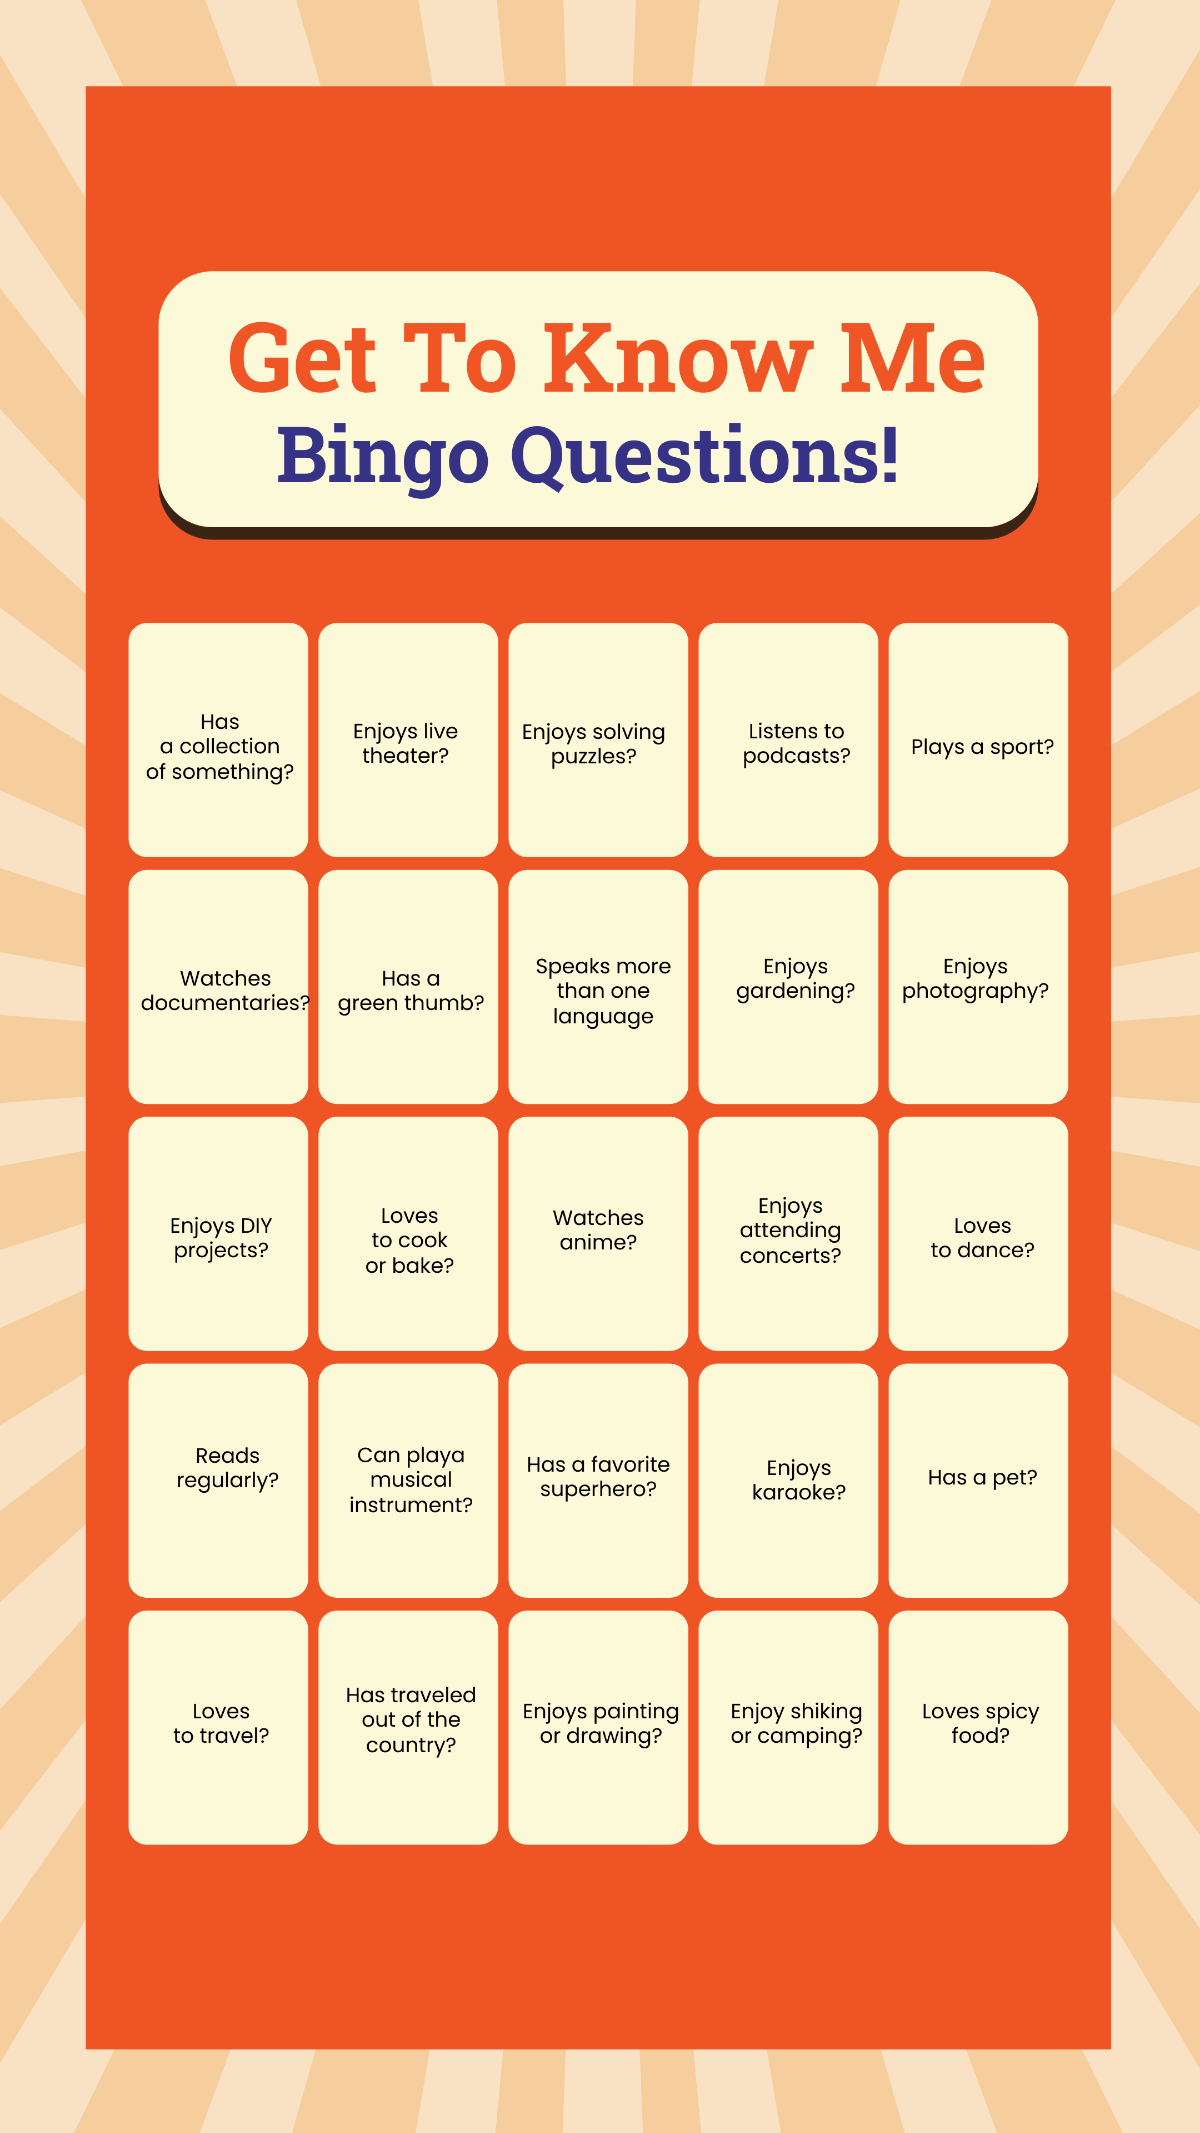 Get to Know Me Bingo Questions